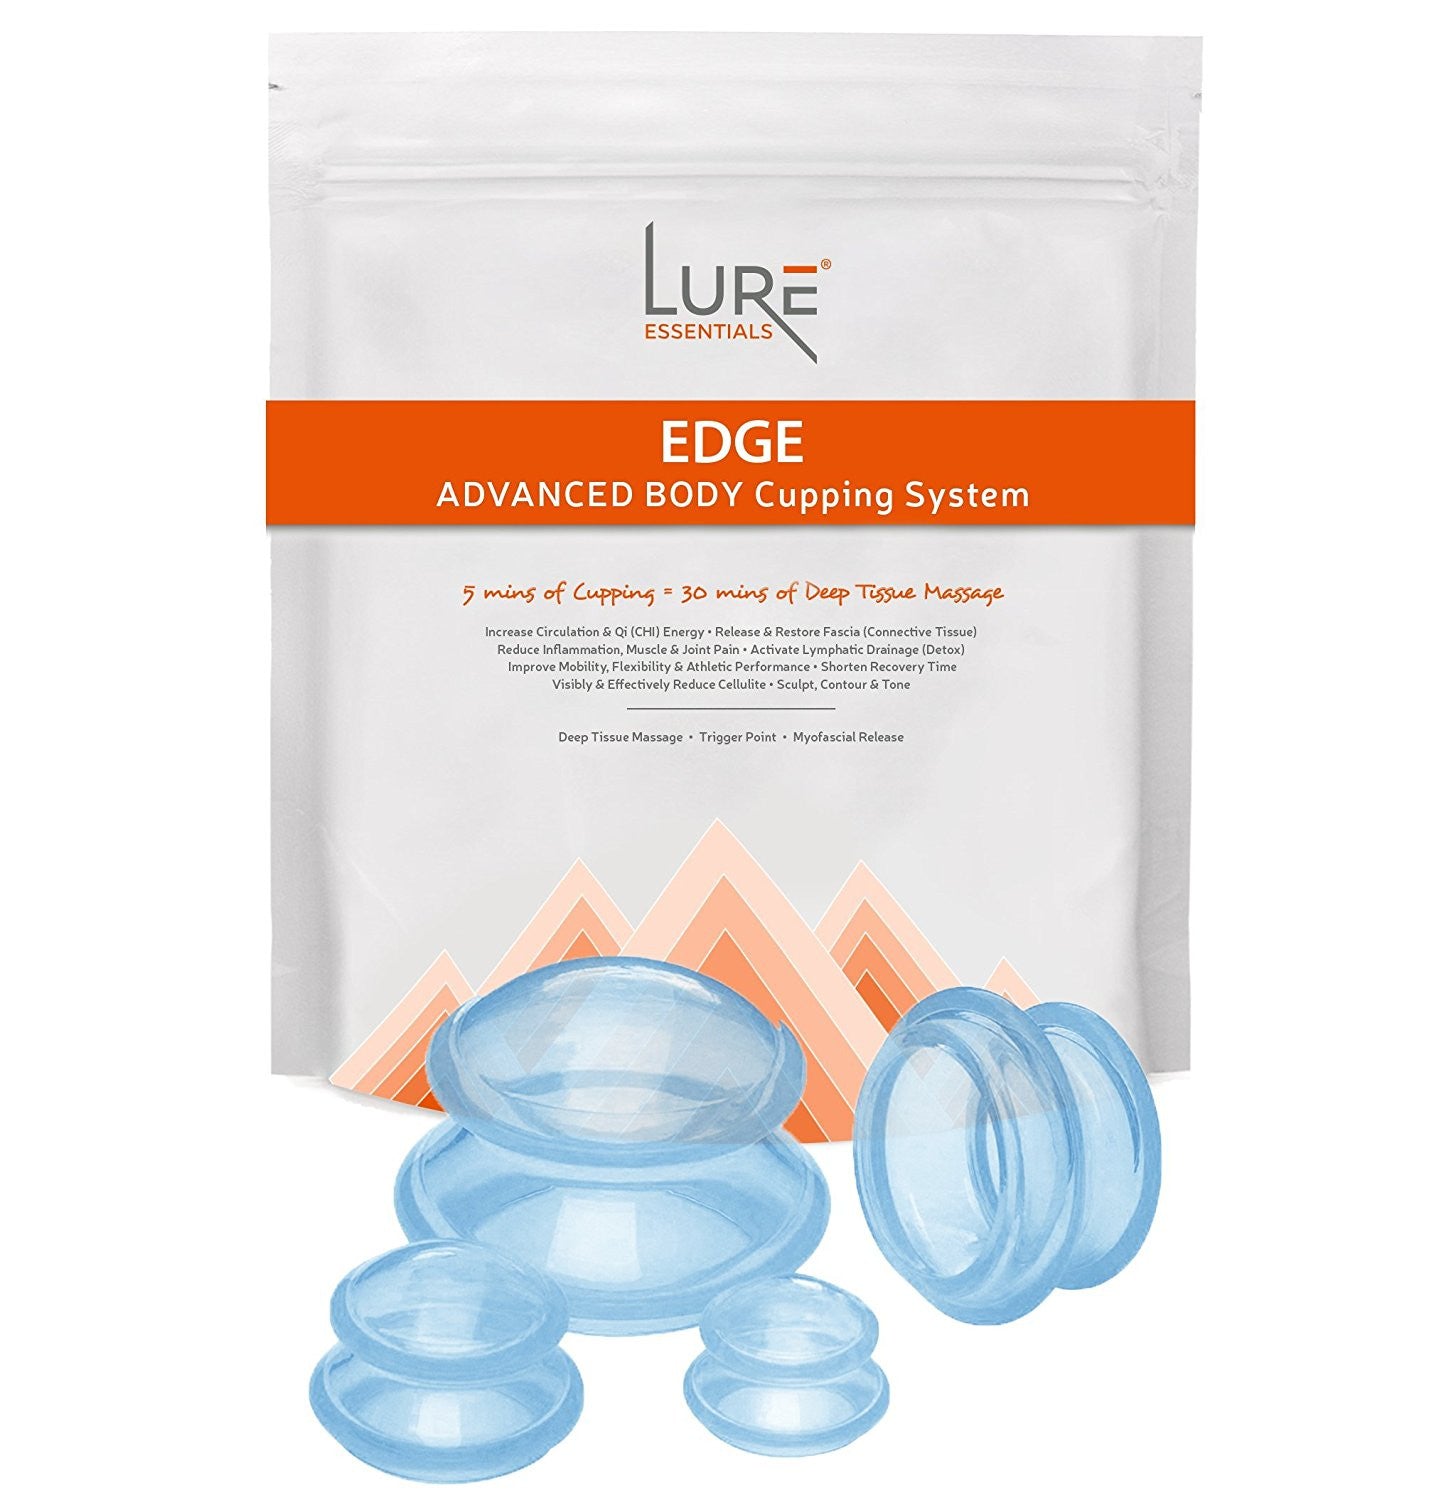 Lure Essentials Lure Edge Cupping Therapy Sets - Silicone Cups for Cupping Professional Choice 8 Cups Blue, Flex